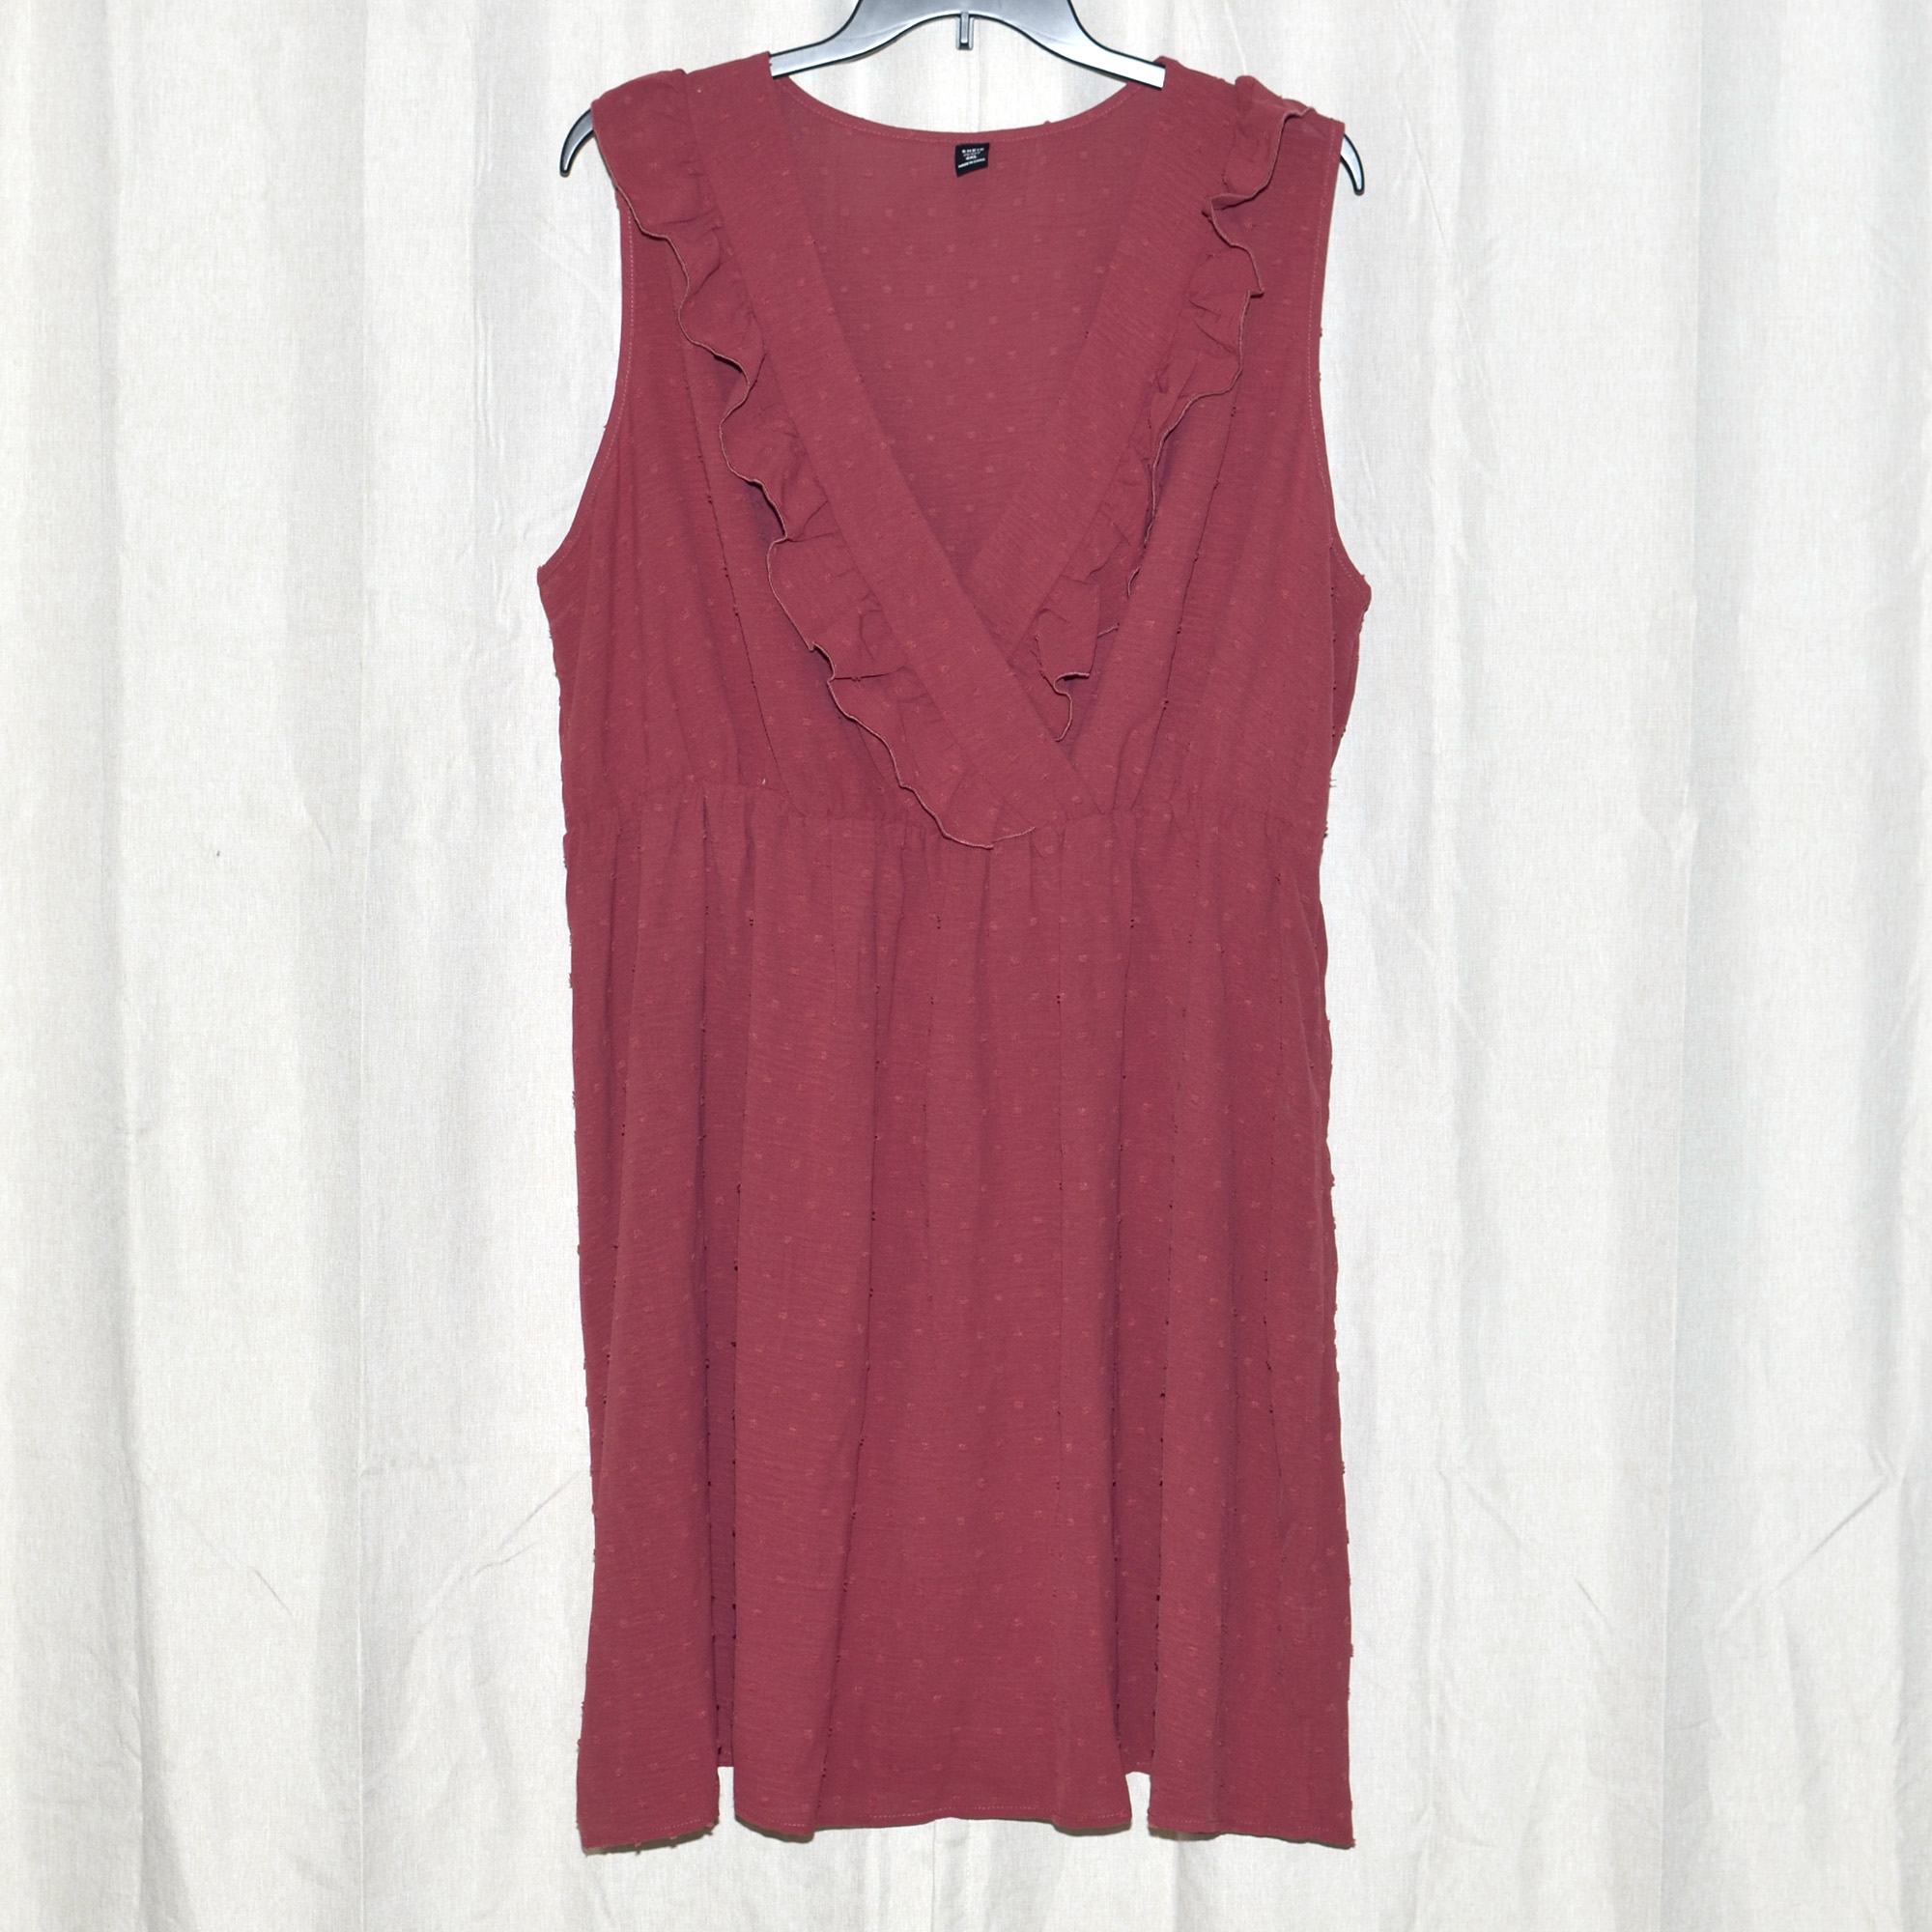 Plus size brick red dobby textured sleeveless dress from Shein featuring ruffle trim accents on the surplice bodice.